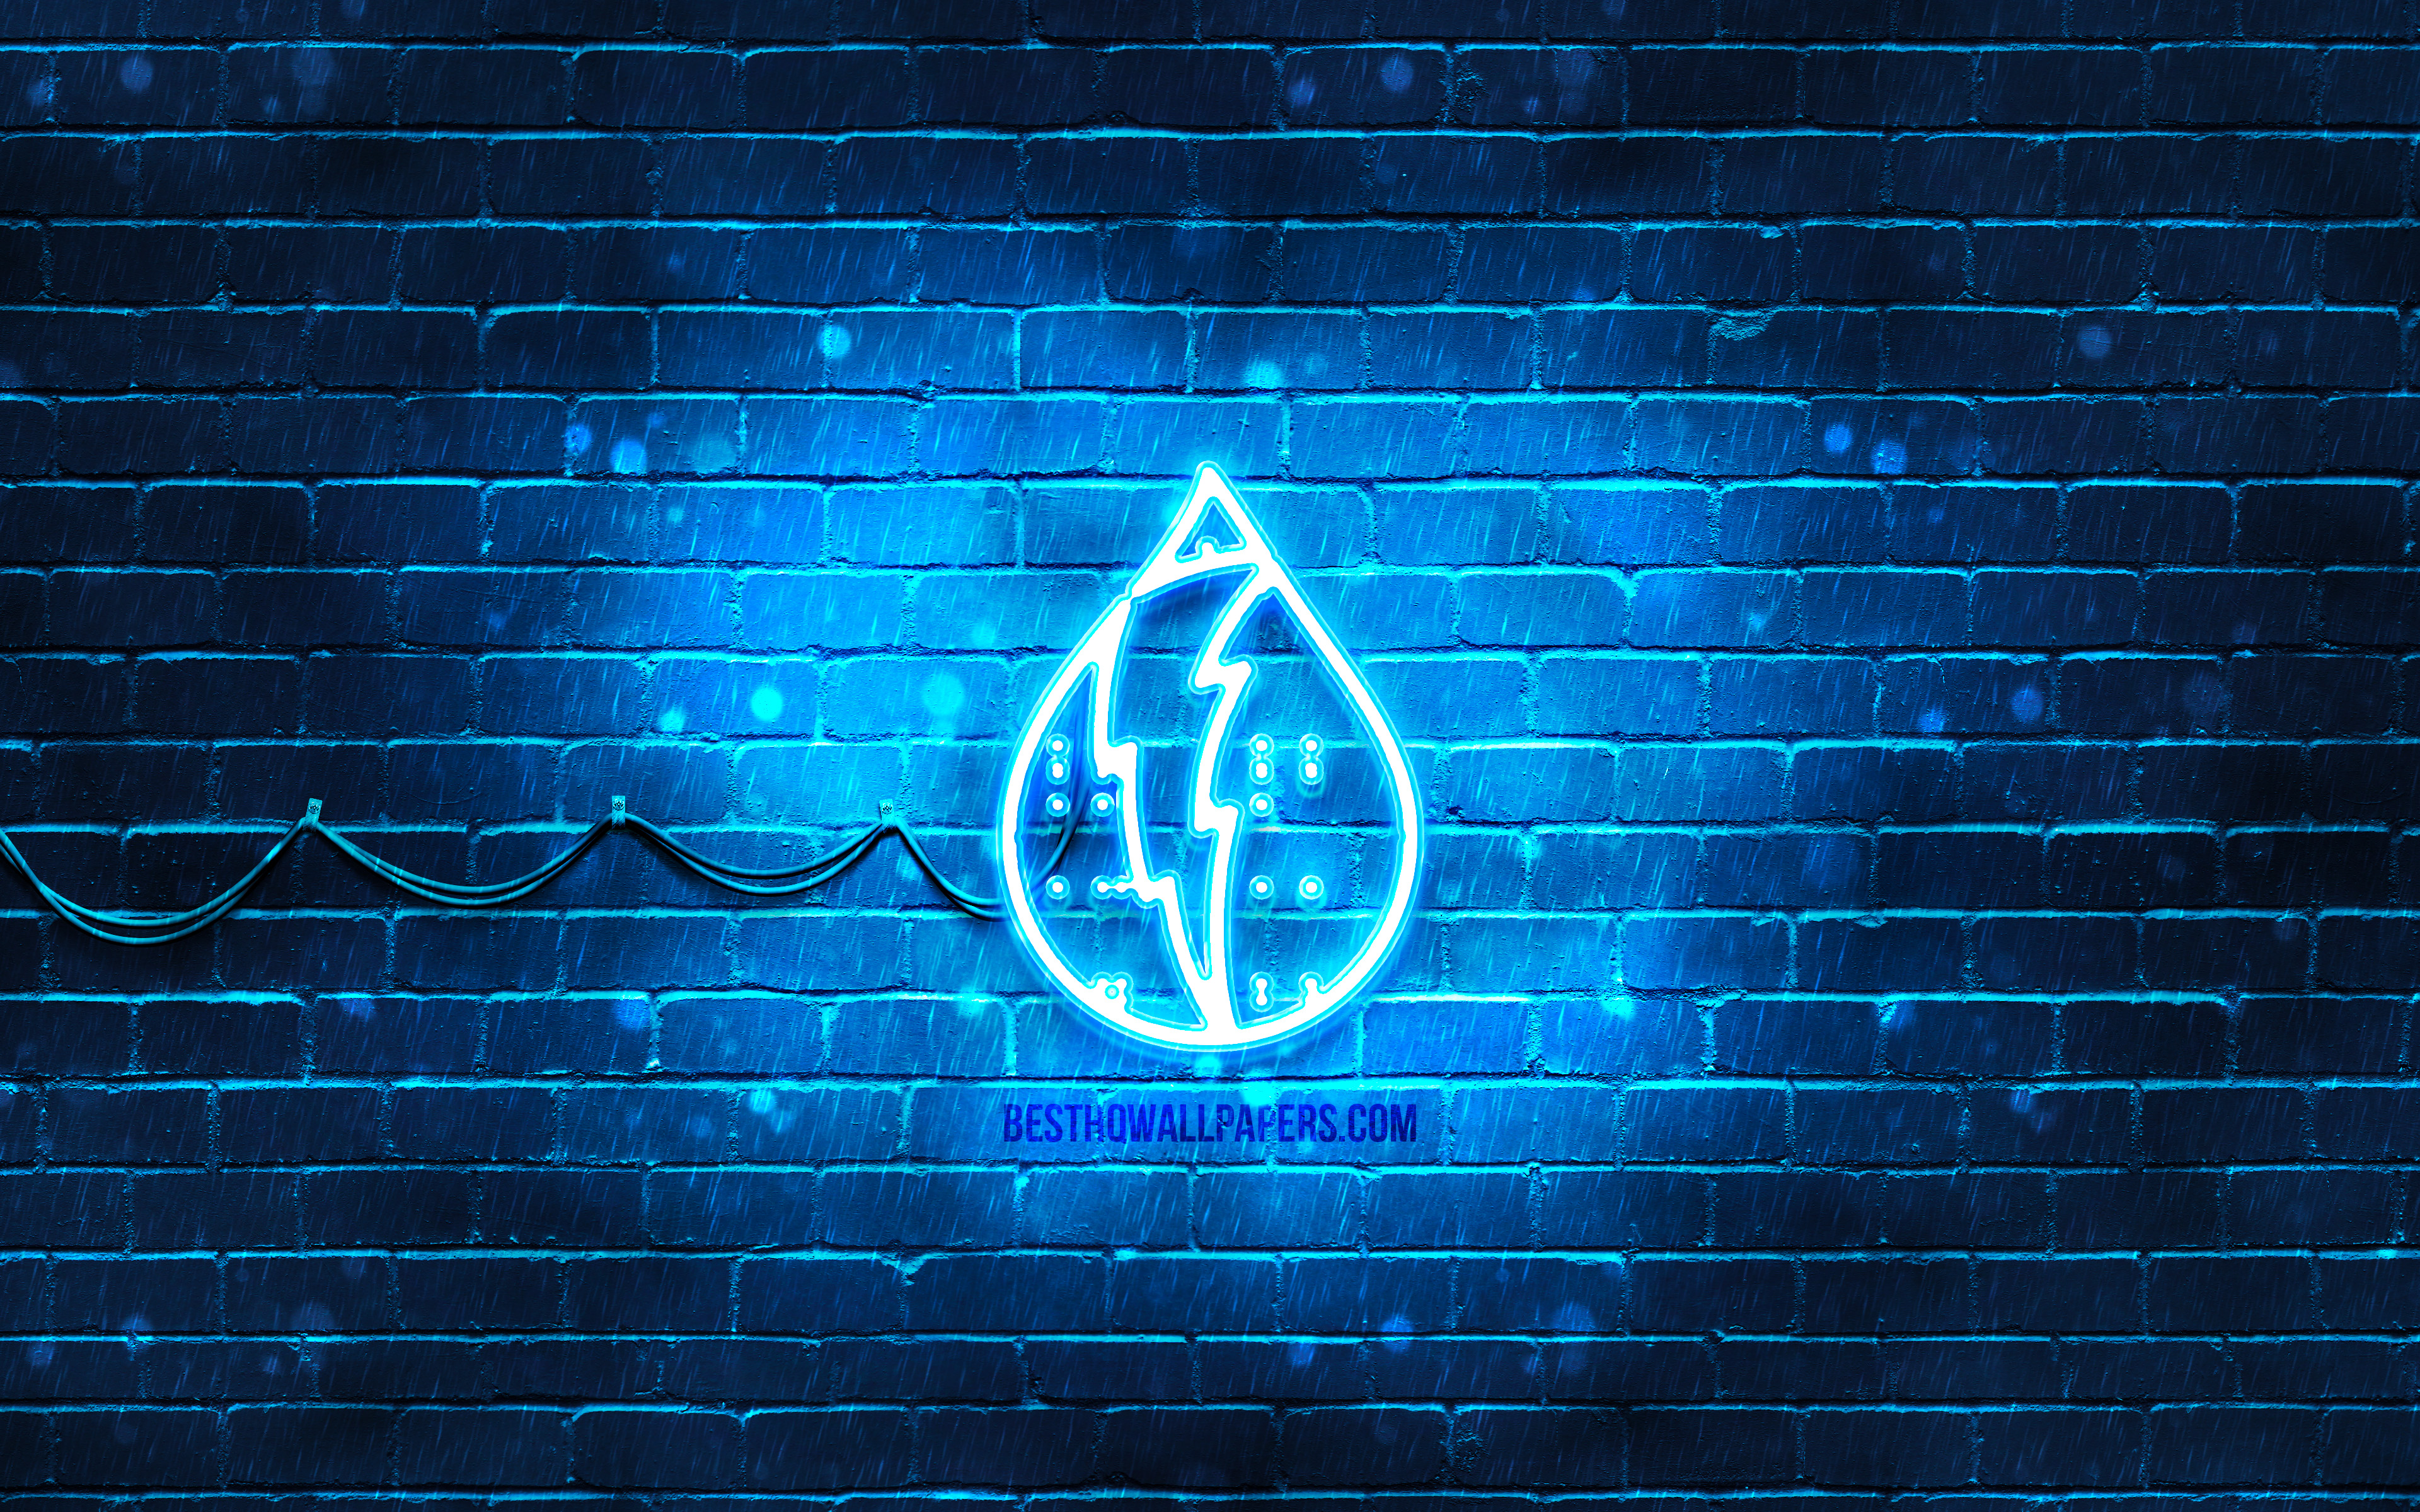 Download wallpaper Hydropower neon icon, 4k, blue background, neon symbols, Hydropower, neon icons, Hydropower sign, nature signs, Hydropower icon, nature icons for desktop with resolution 3840x2400. High Quality HD picture wallpaper